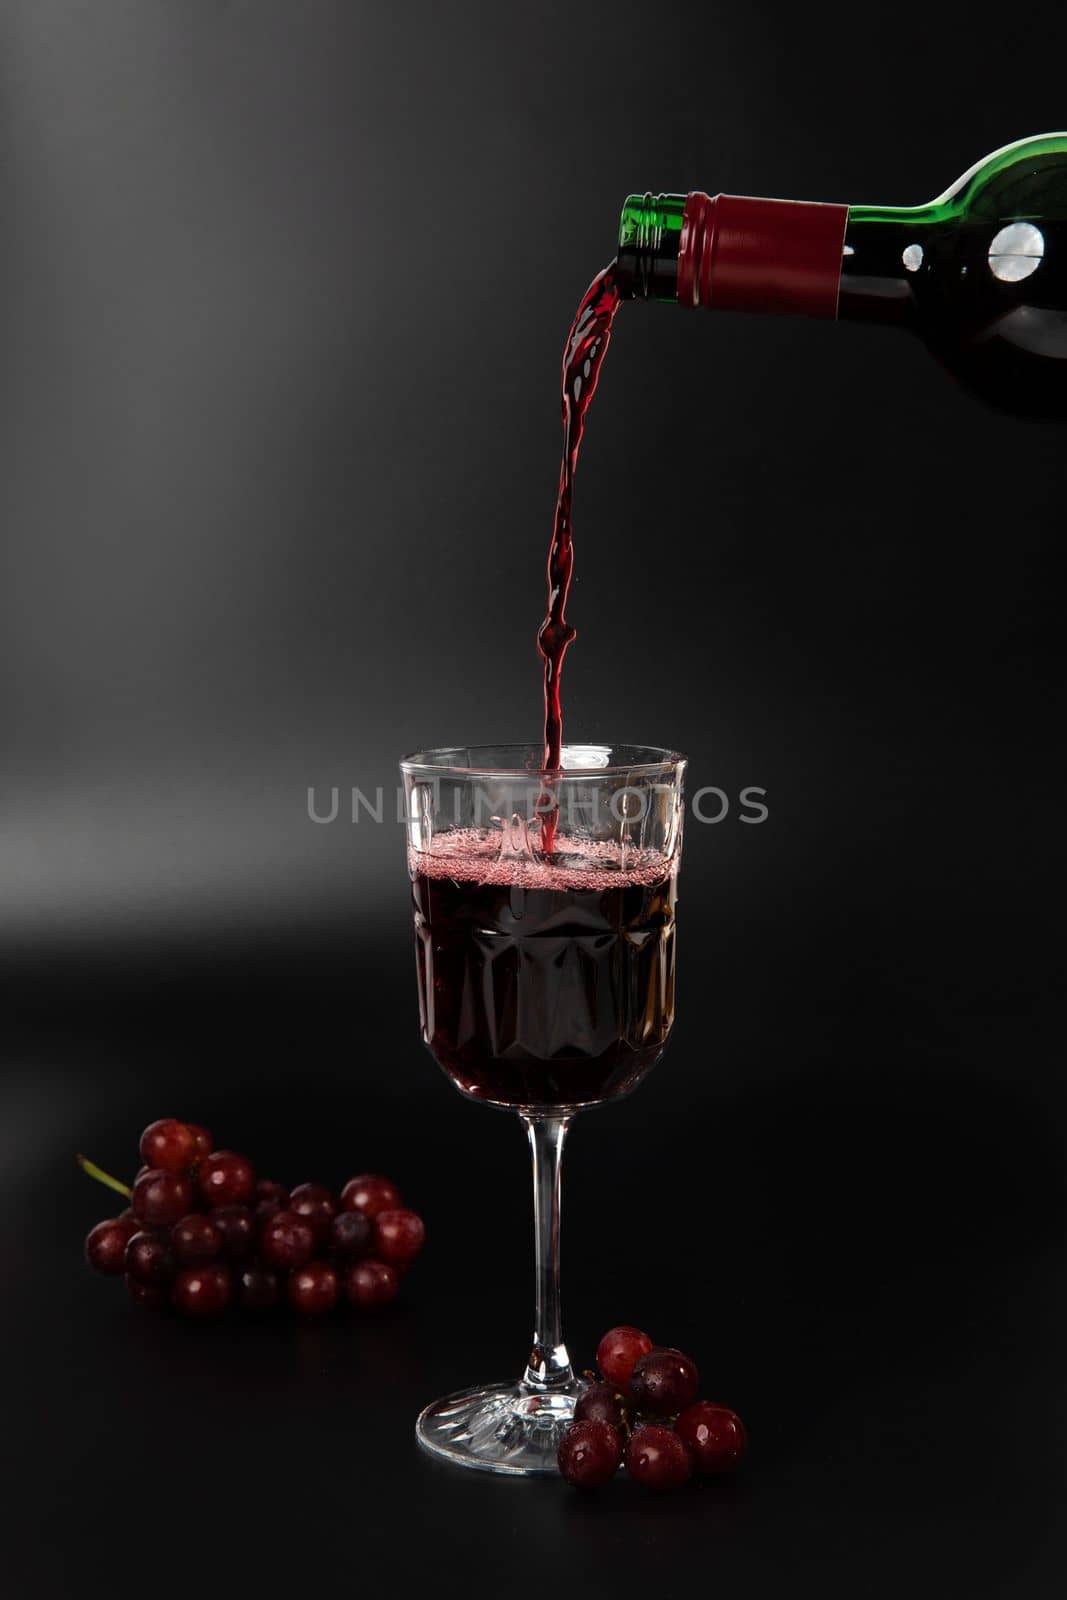 Red wine is poured into a wine glass on a black background with grapes and splash by Annebel146